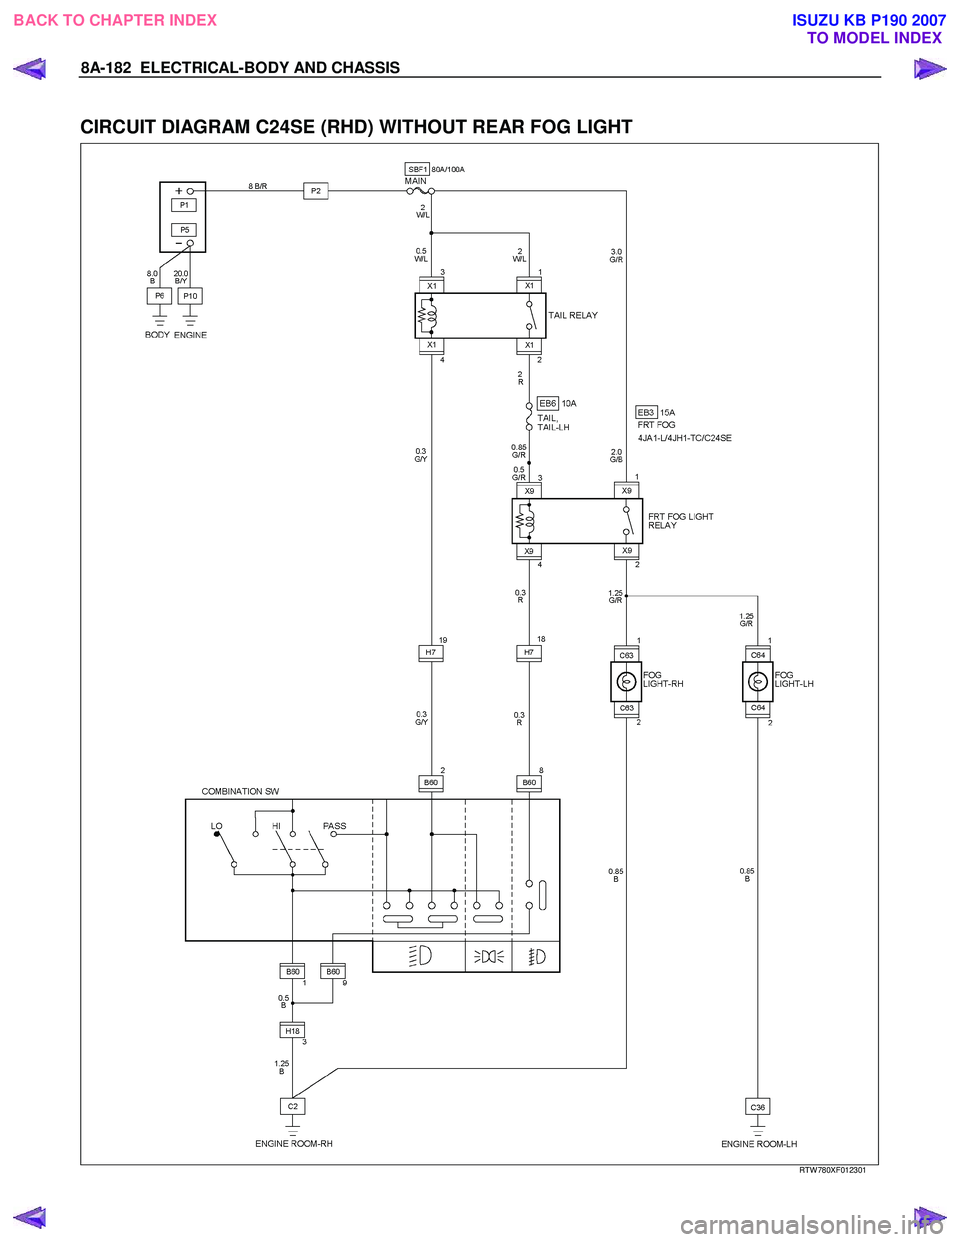 ISUZU KB P190 2007  Workshop User Guide 8A-182  ELECTRICAL-BODY AND CHASSIS 
 
CIRCUIT DIAGRAM C24SE (RHD) WITHOUT REAR FOG LIGHT 
  
  
RTW 780XF012301 
 
BACK TO CHAPTER INDEX
TO MODEL INDEXISUZU KB P190 2007 